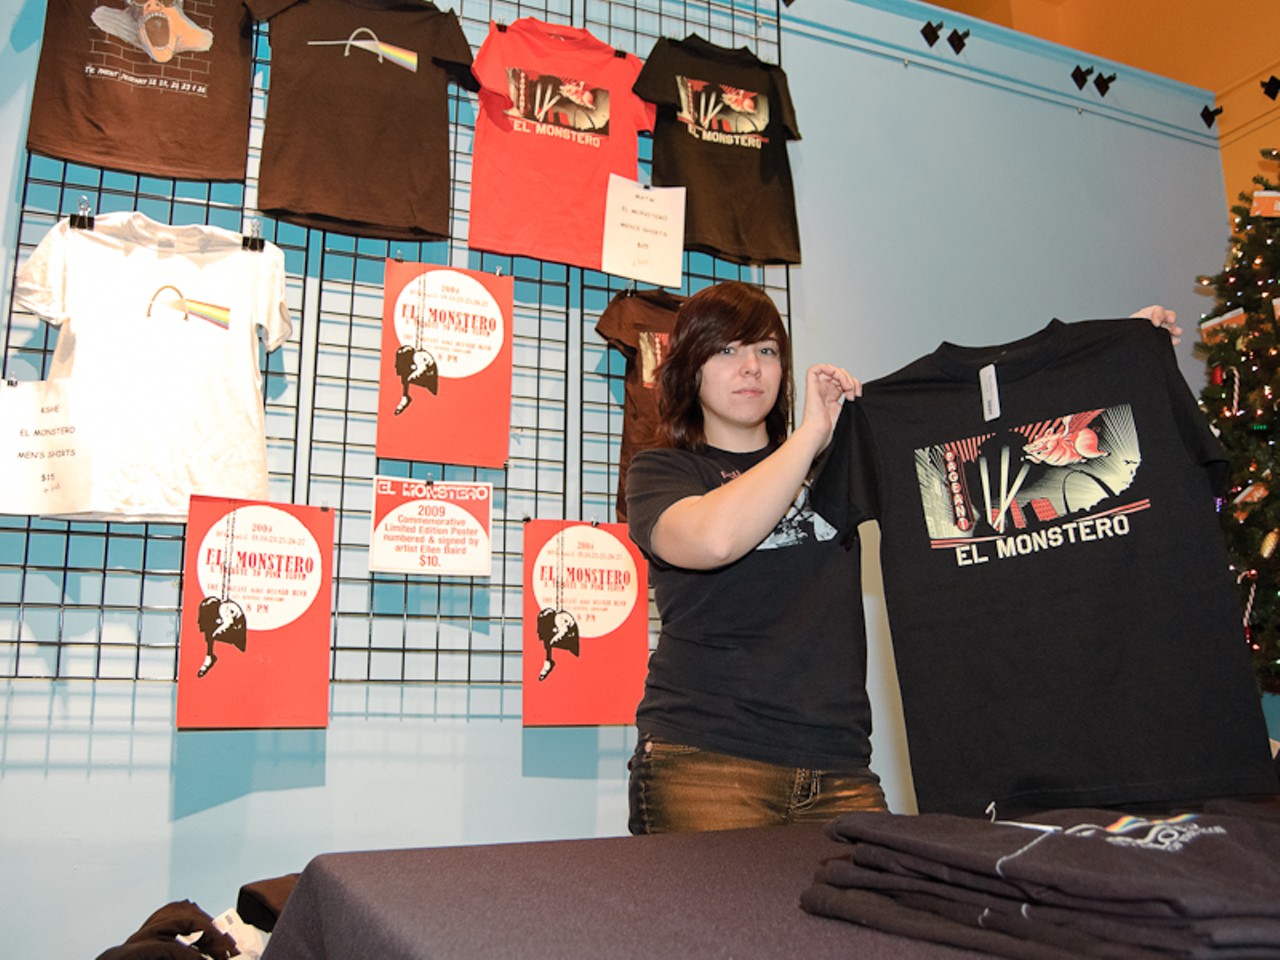 El Monstero's merchandise - T-shirts and posters, all of which feature St. Louis based artwork. No CD's, for obvious reasons.